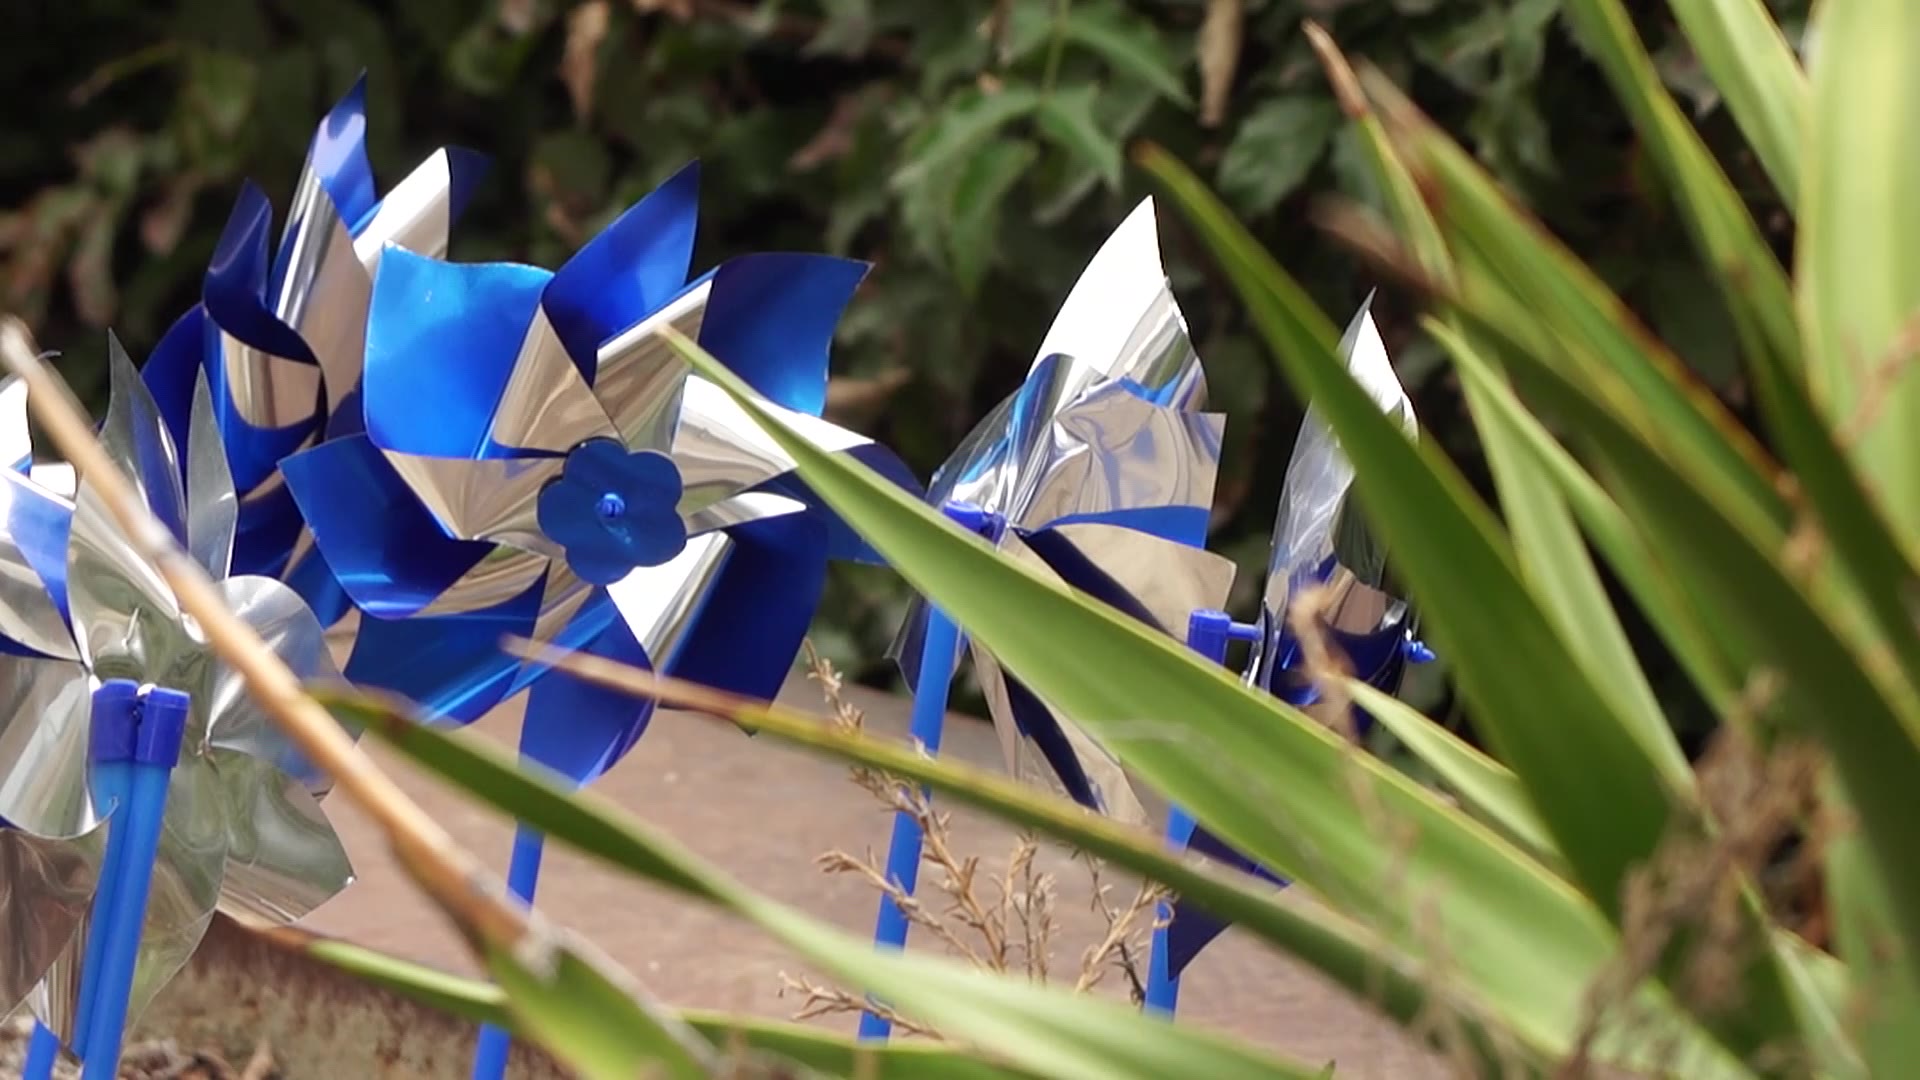 Blue pinwheels represent a happy childhood as April is National Child Abuse Prevention Month....